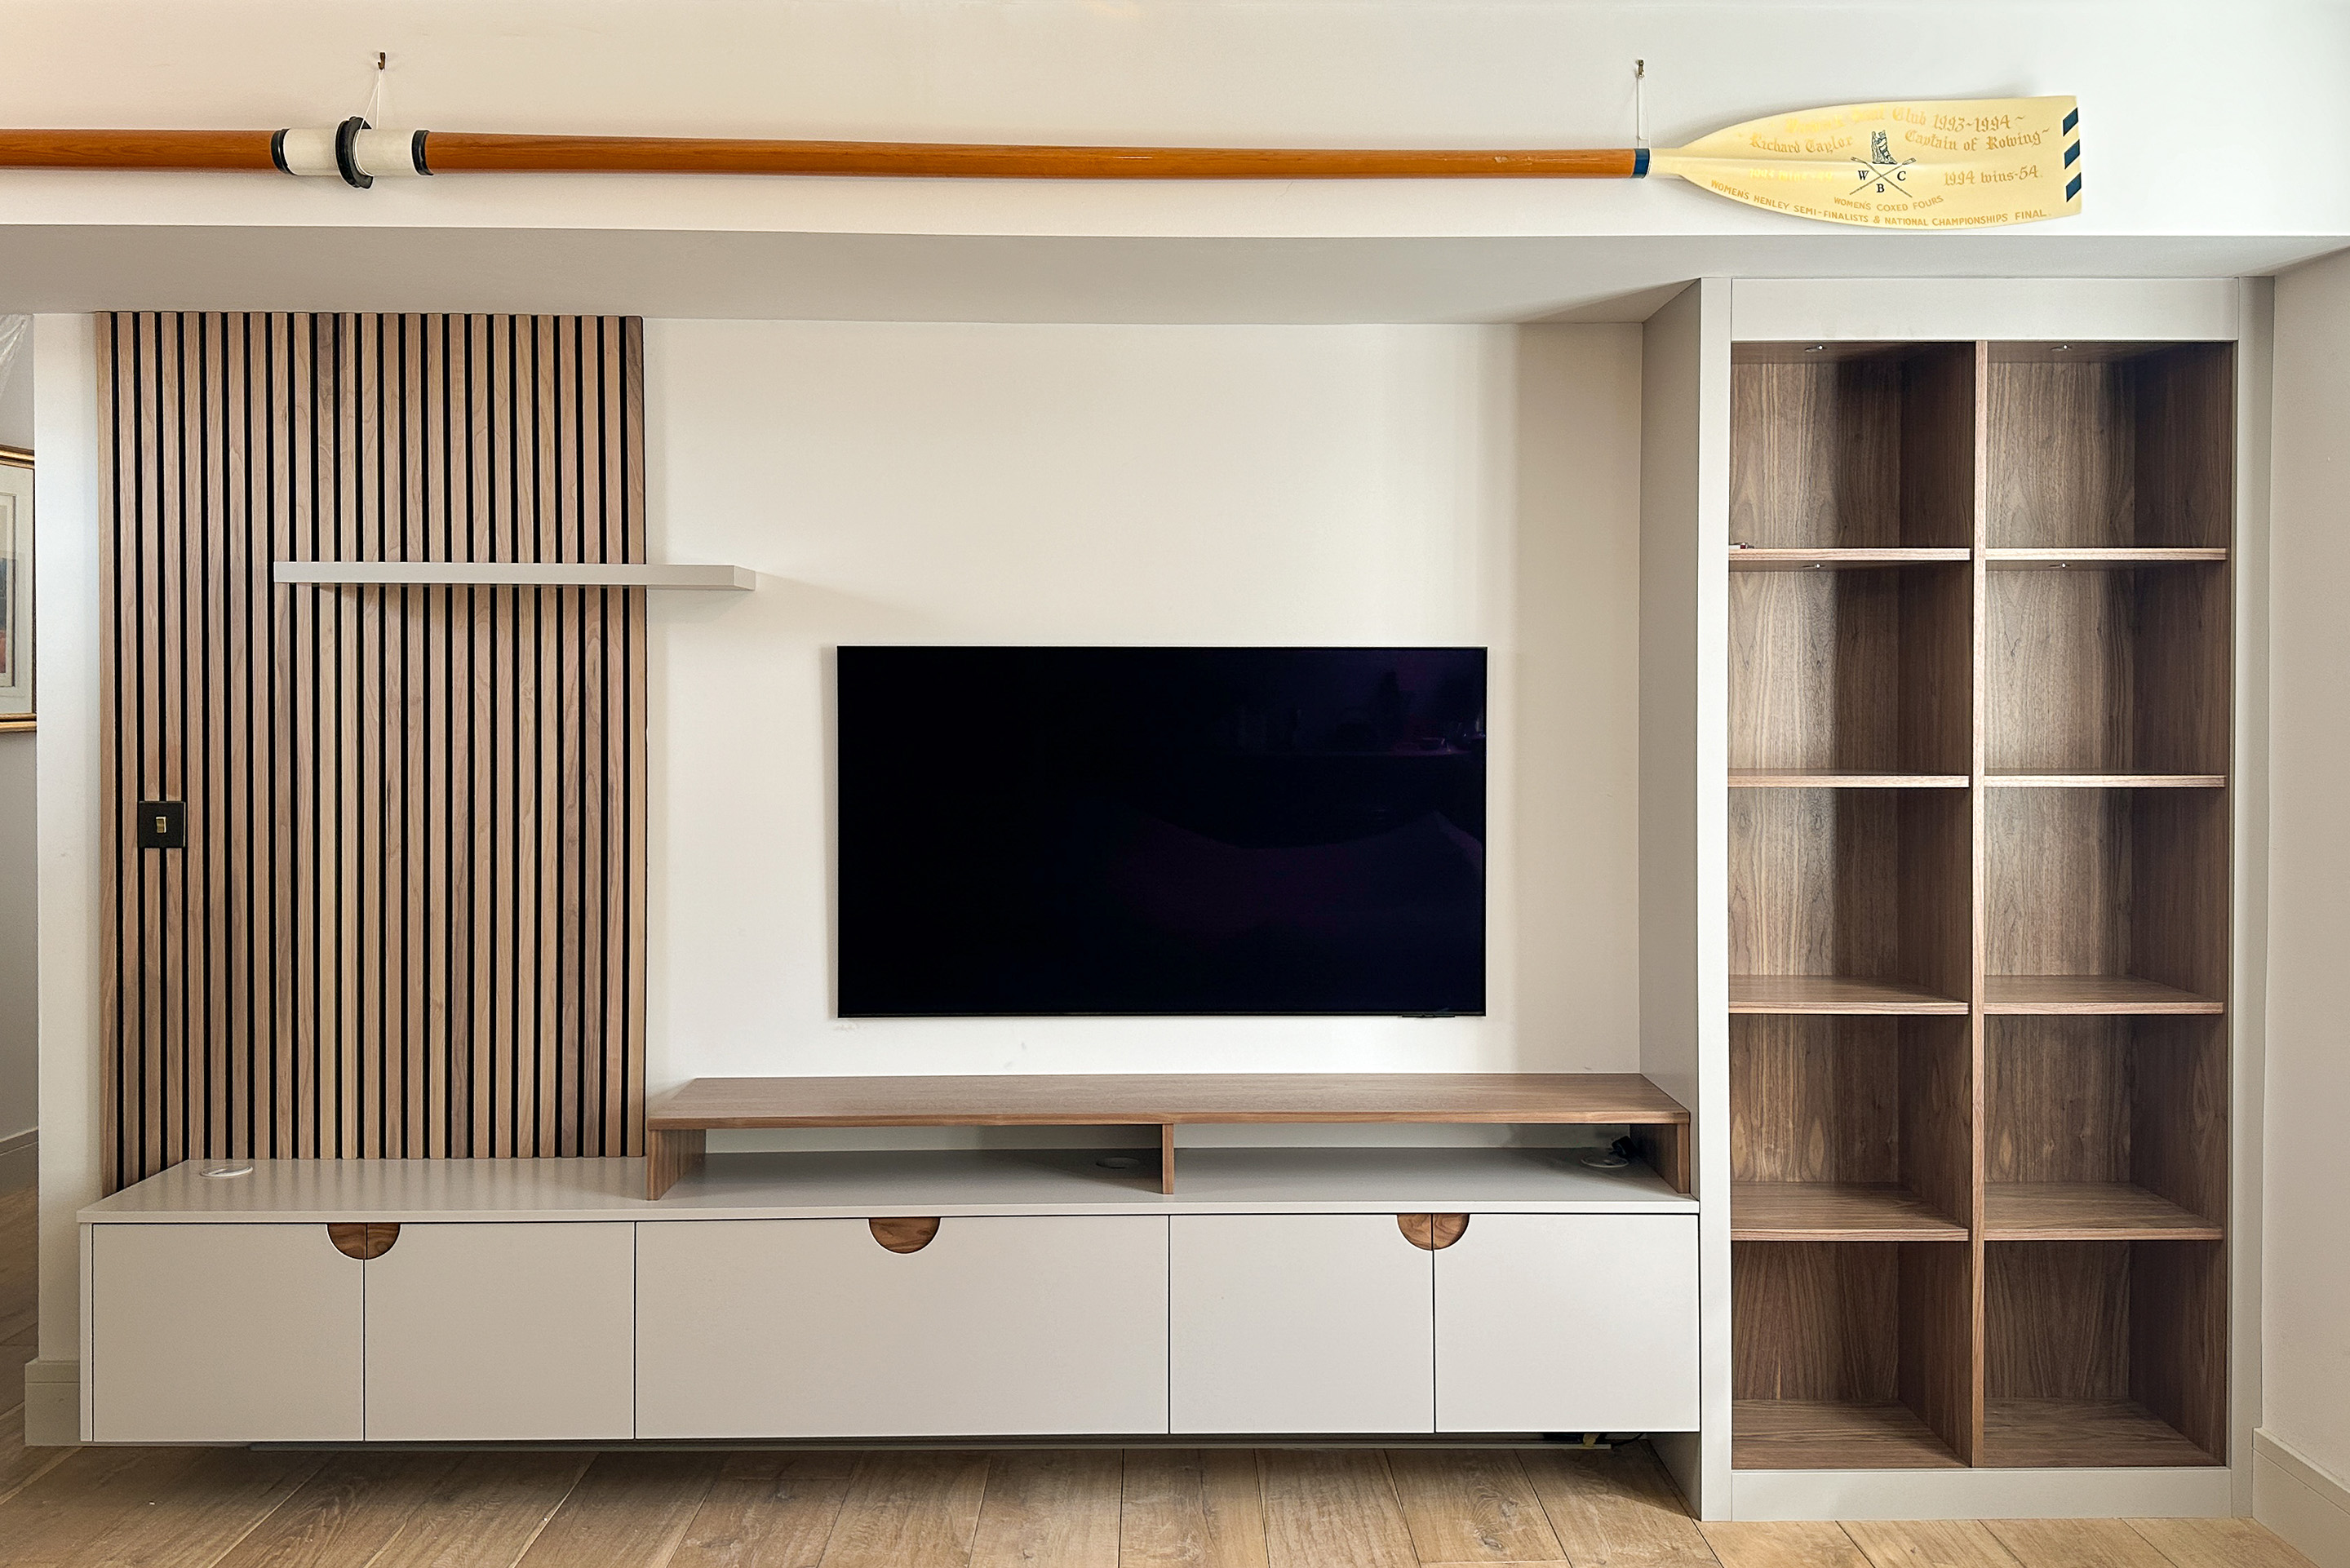 Bespoke media wall in walnut with slat panelling and integrated lighting